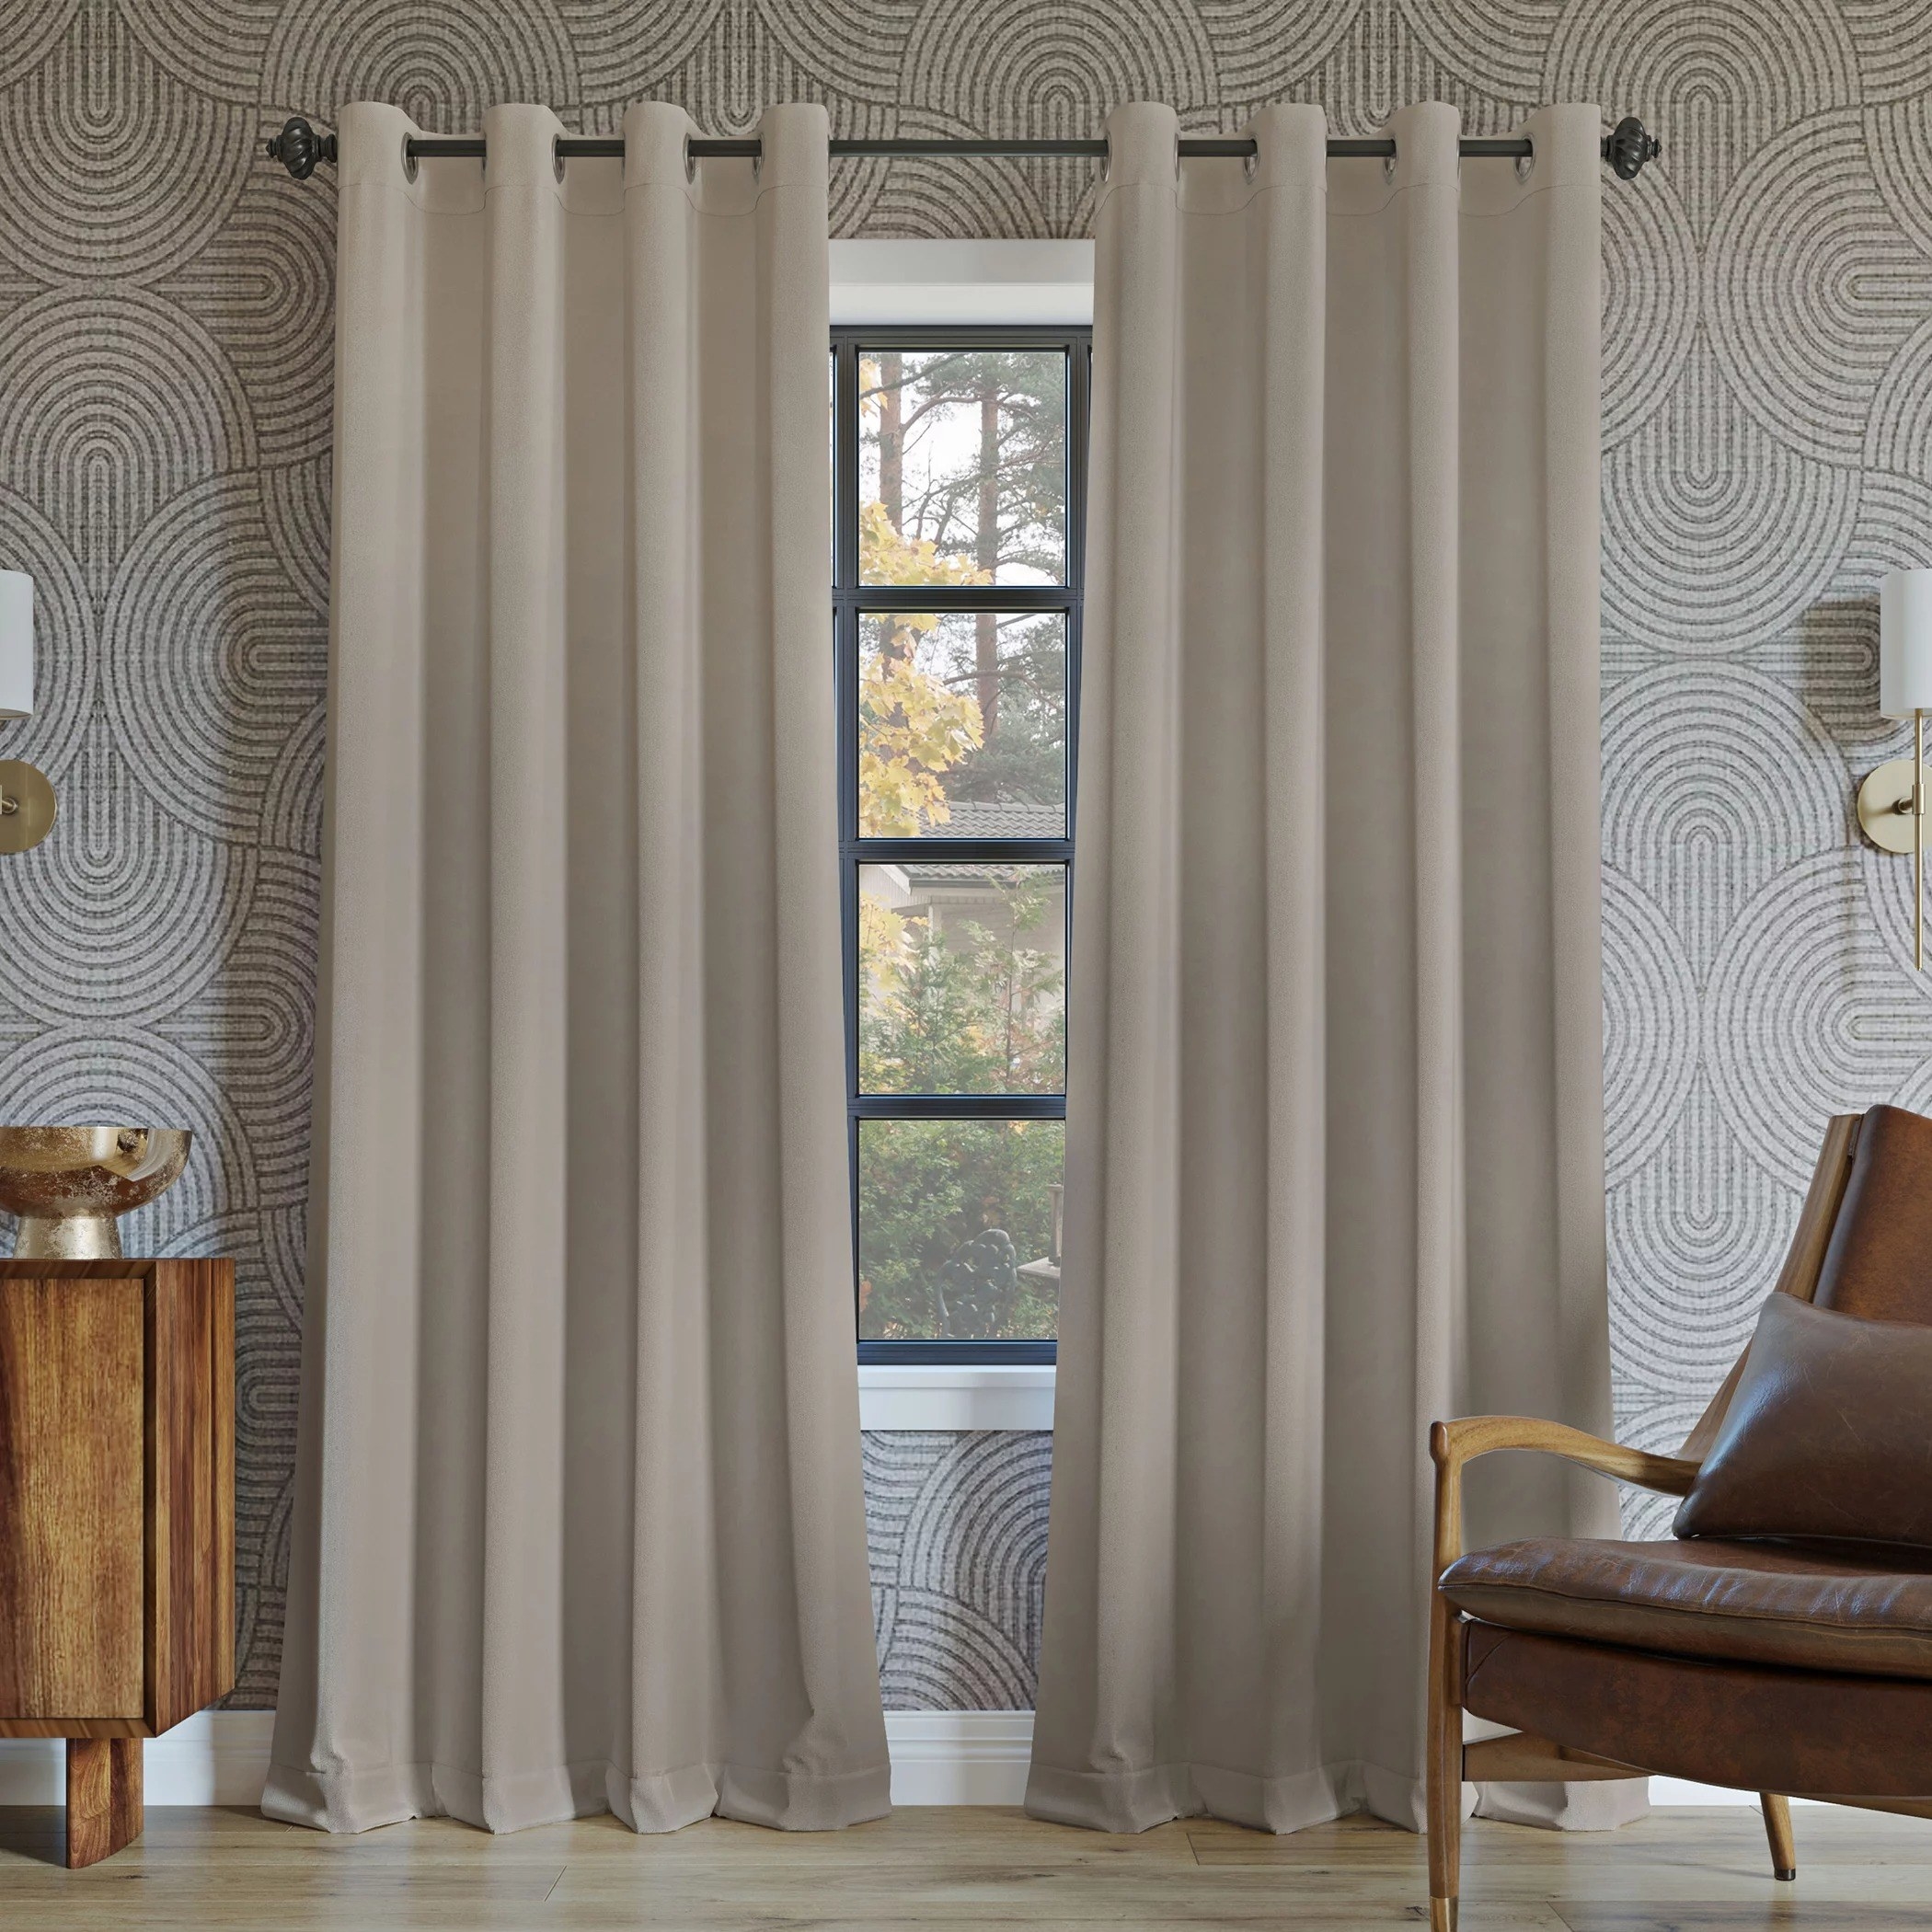 the beige curtain panels